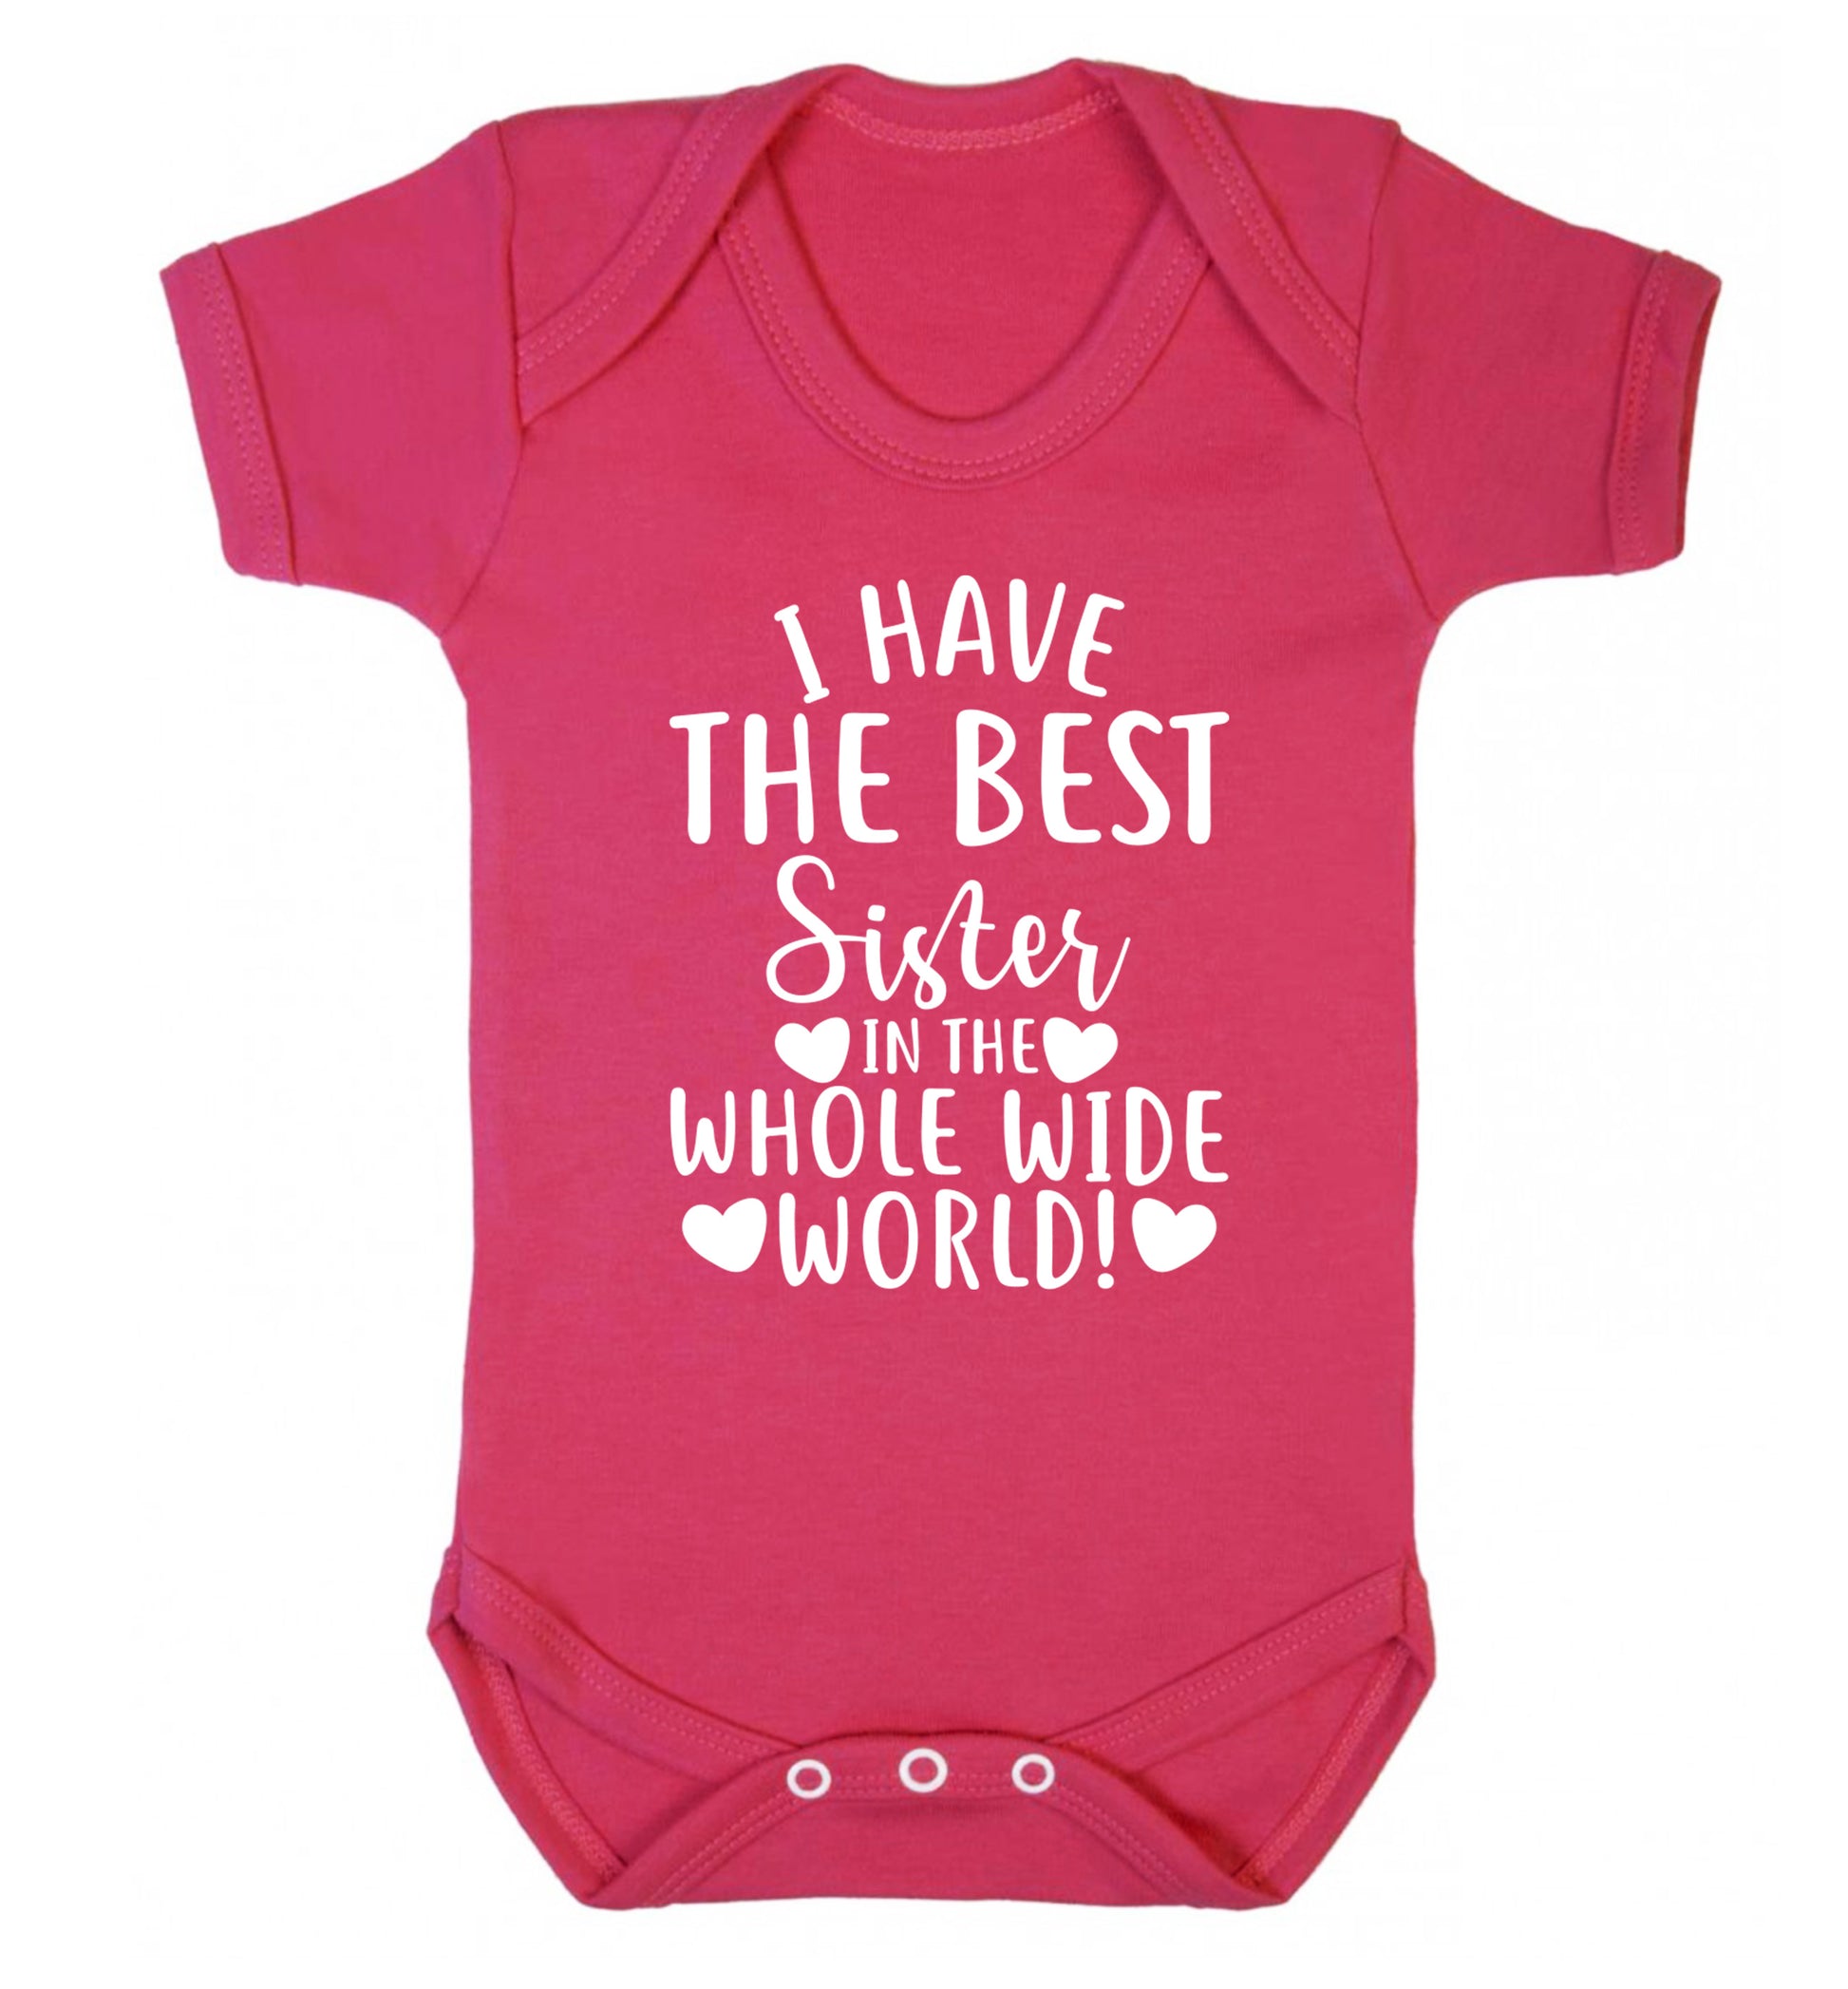 I have the best sister in the whole wide world! Baby Vest dark pink 18-24 months